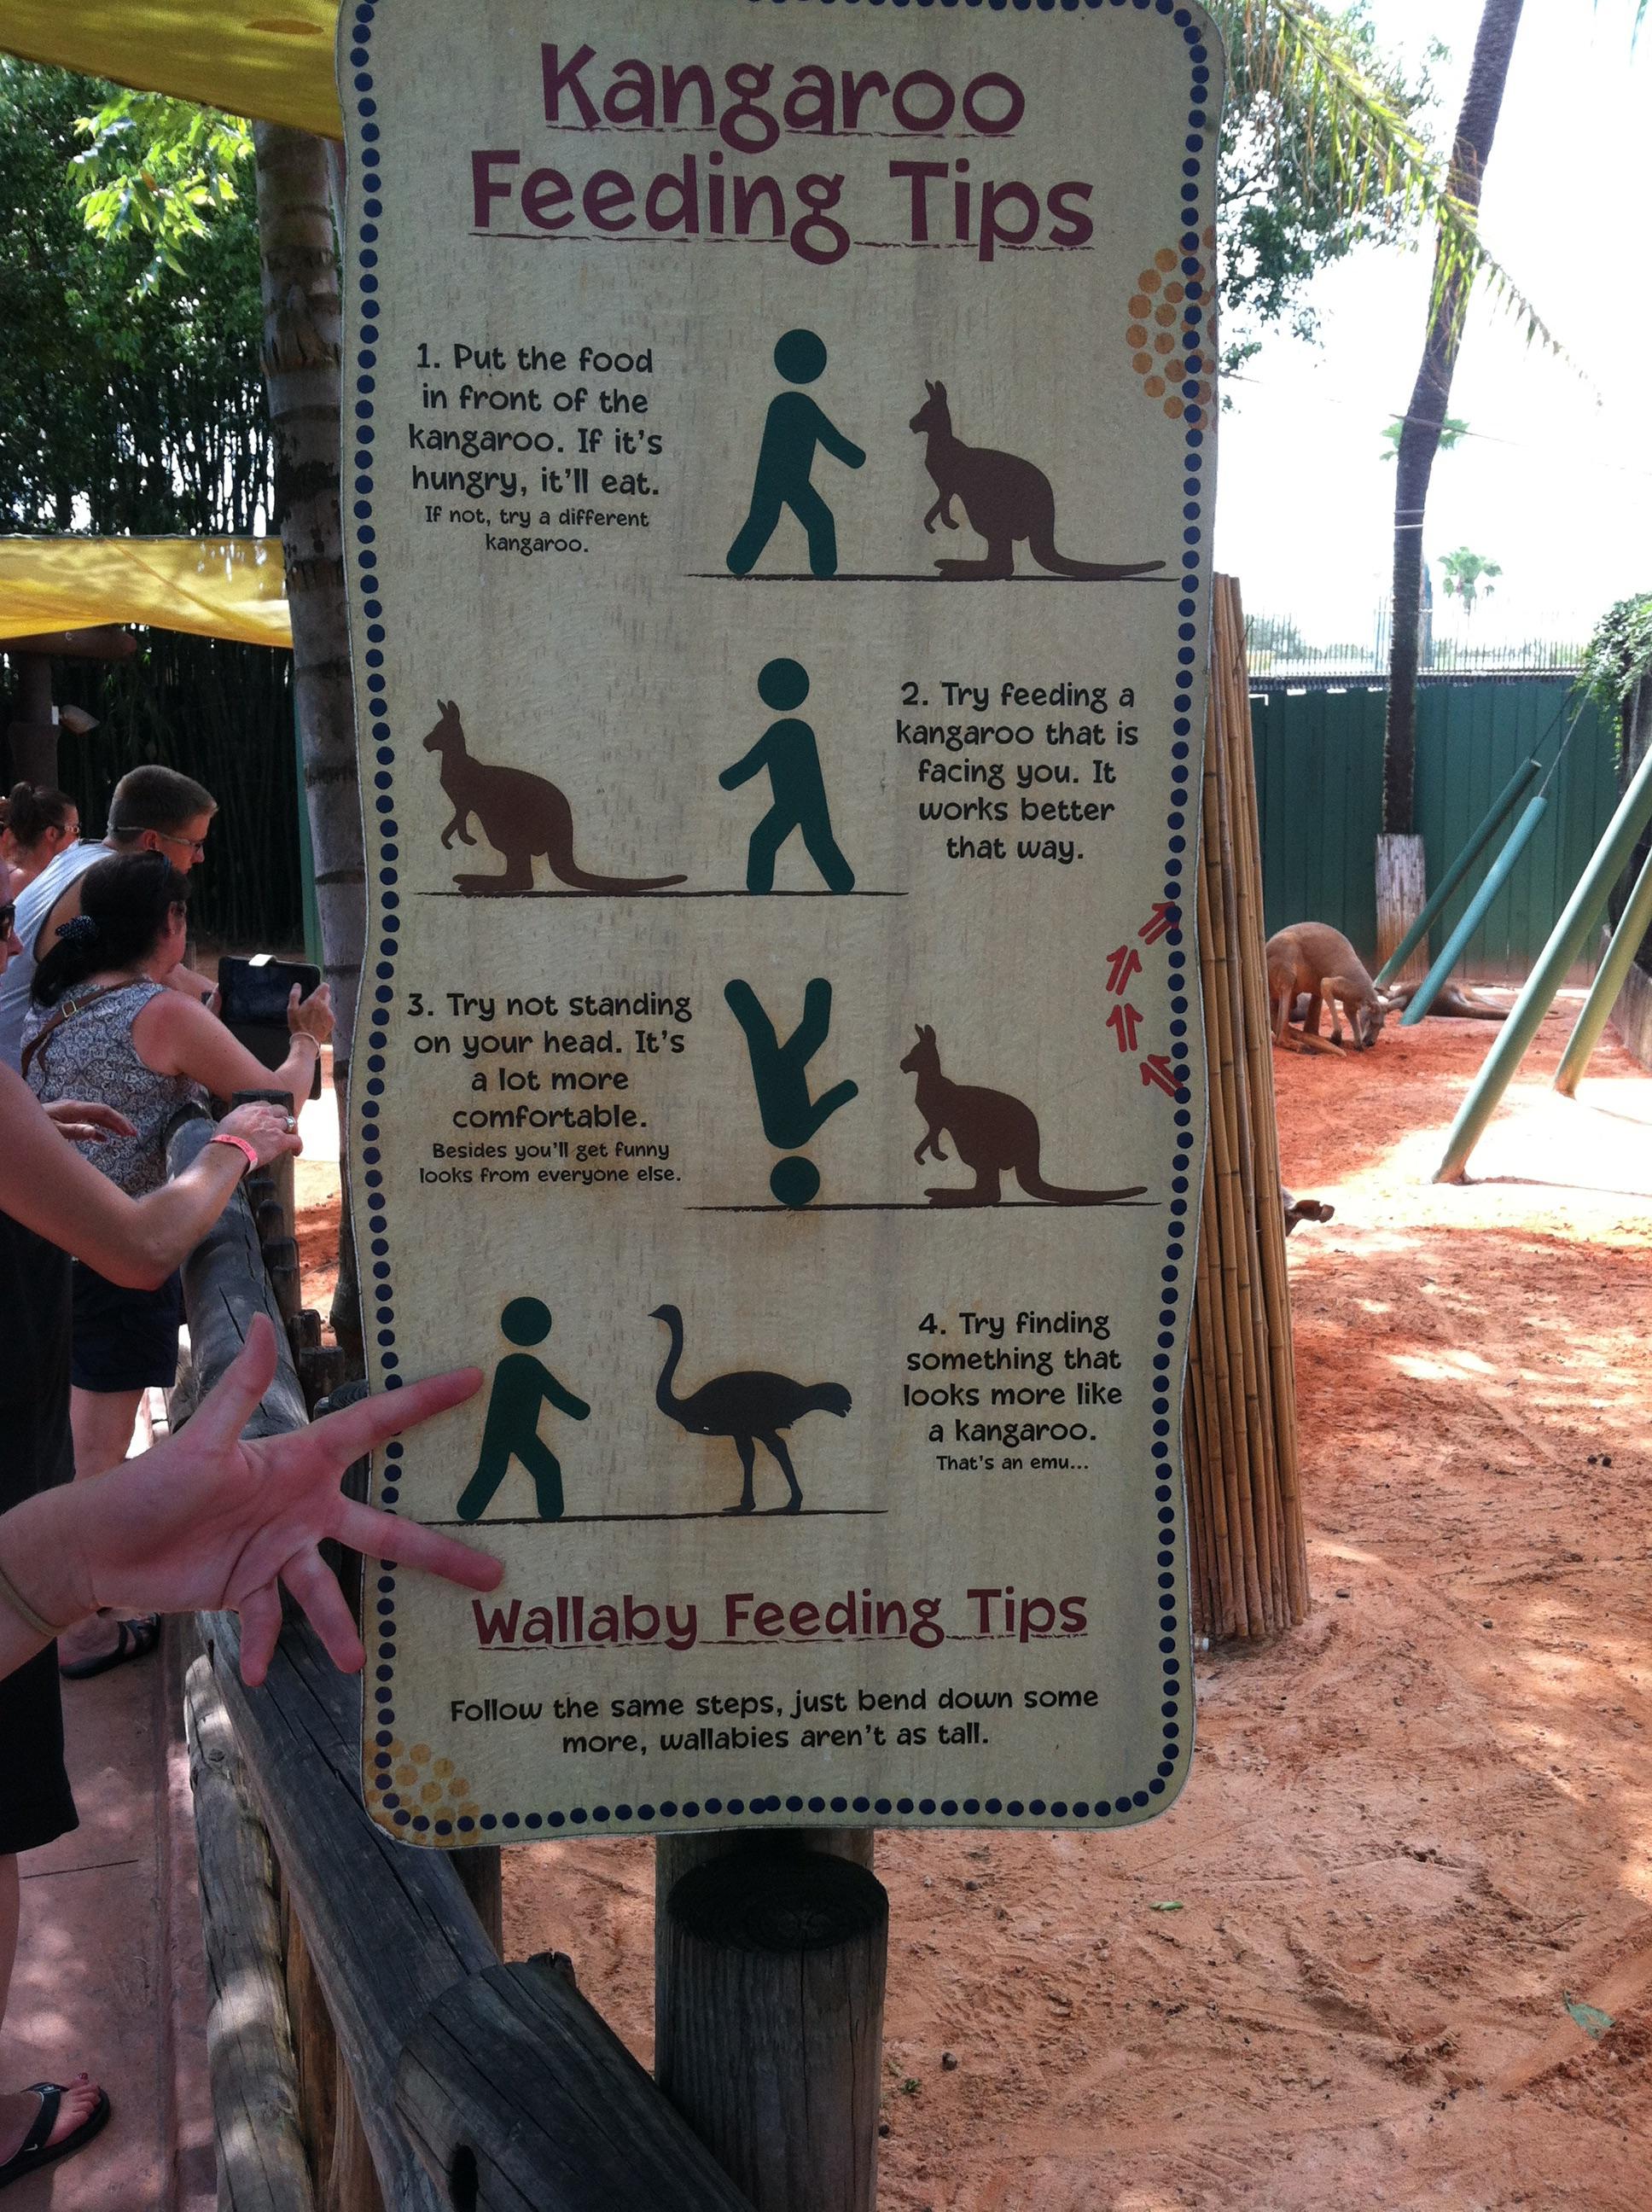 Kangaroo feeding tips for those who find it hard to walk and chew gum at the same time.